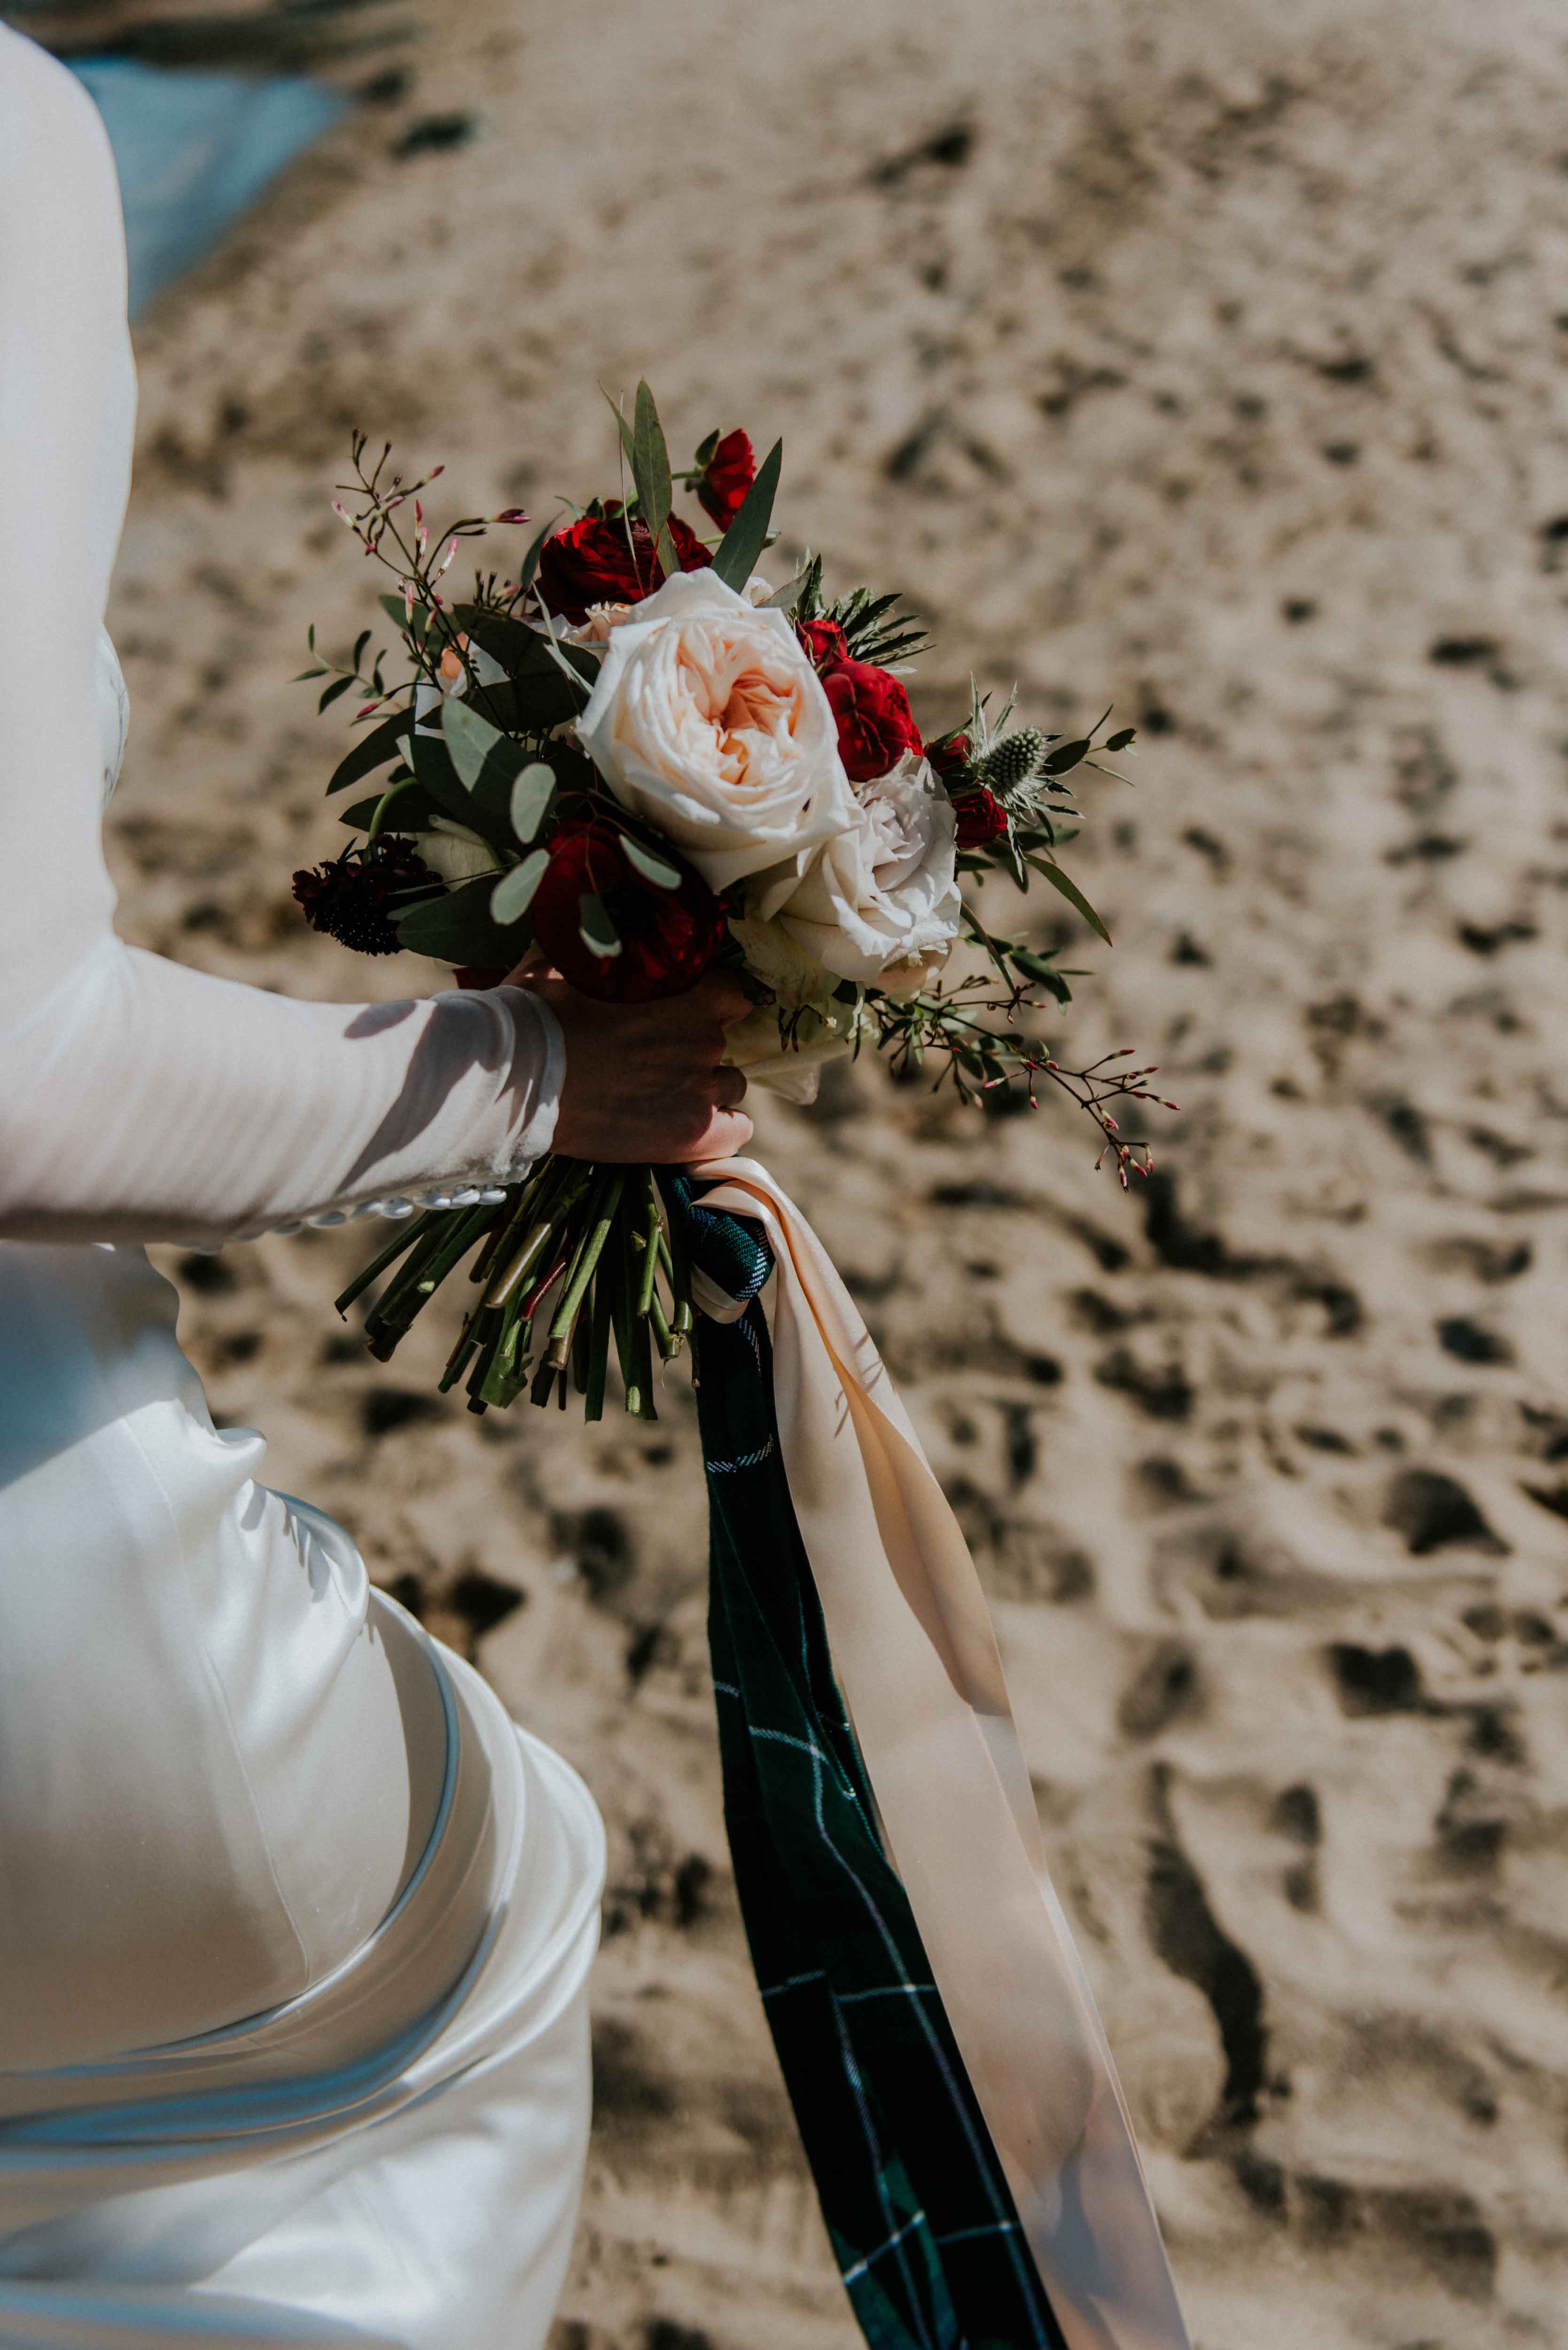 Woman holding a bouquet of flowers on the beach.